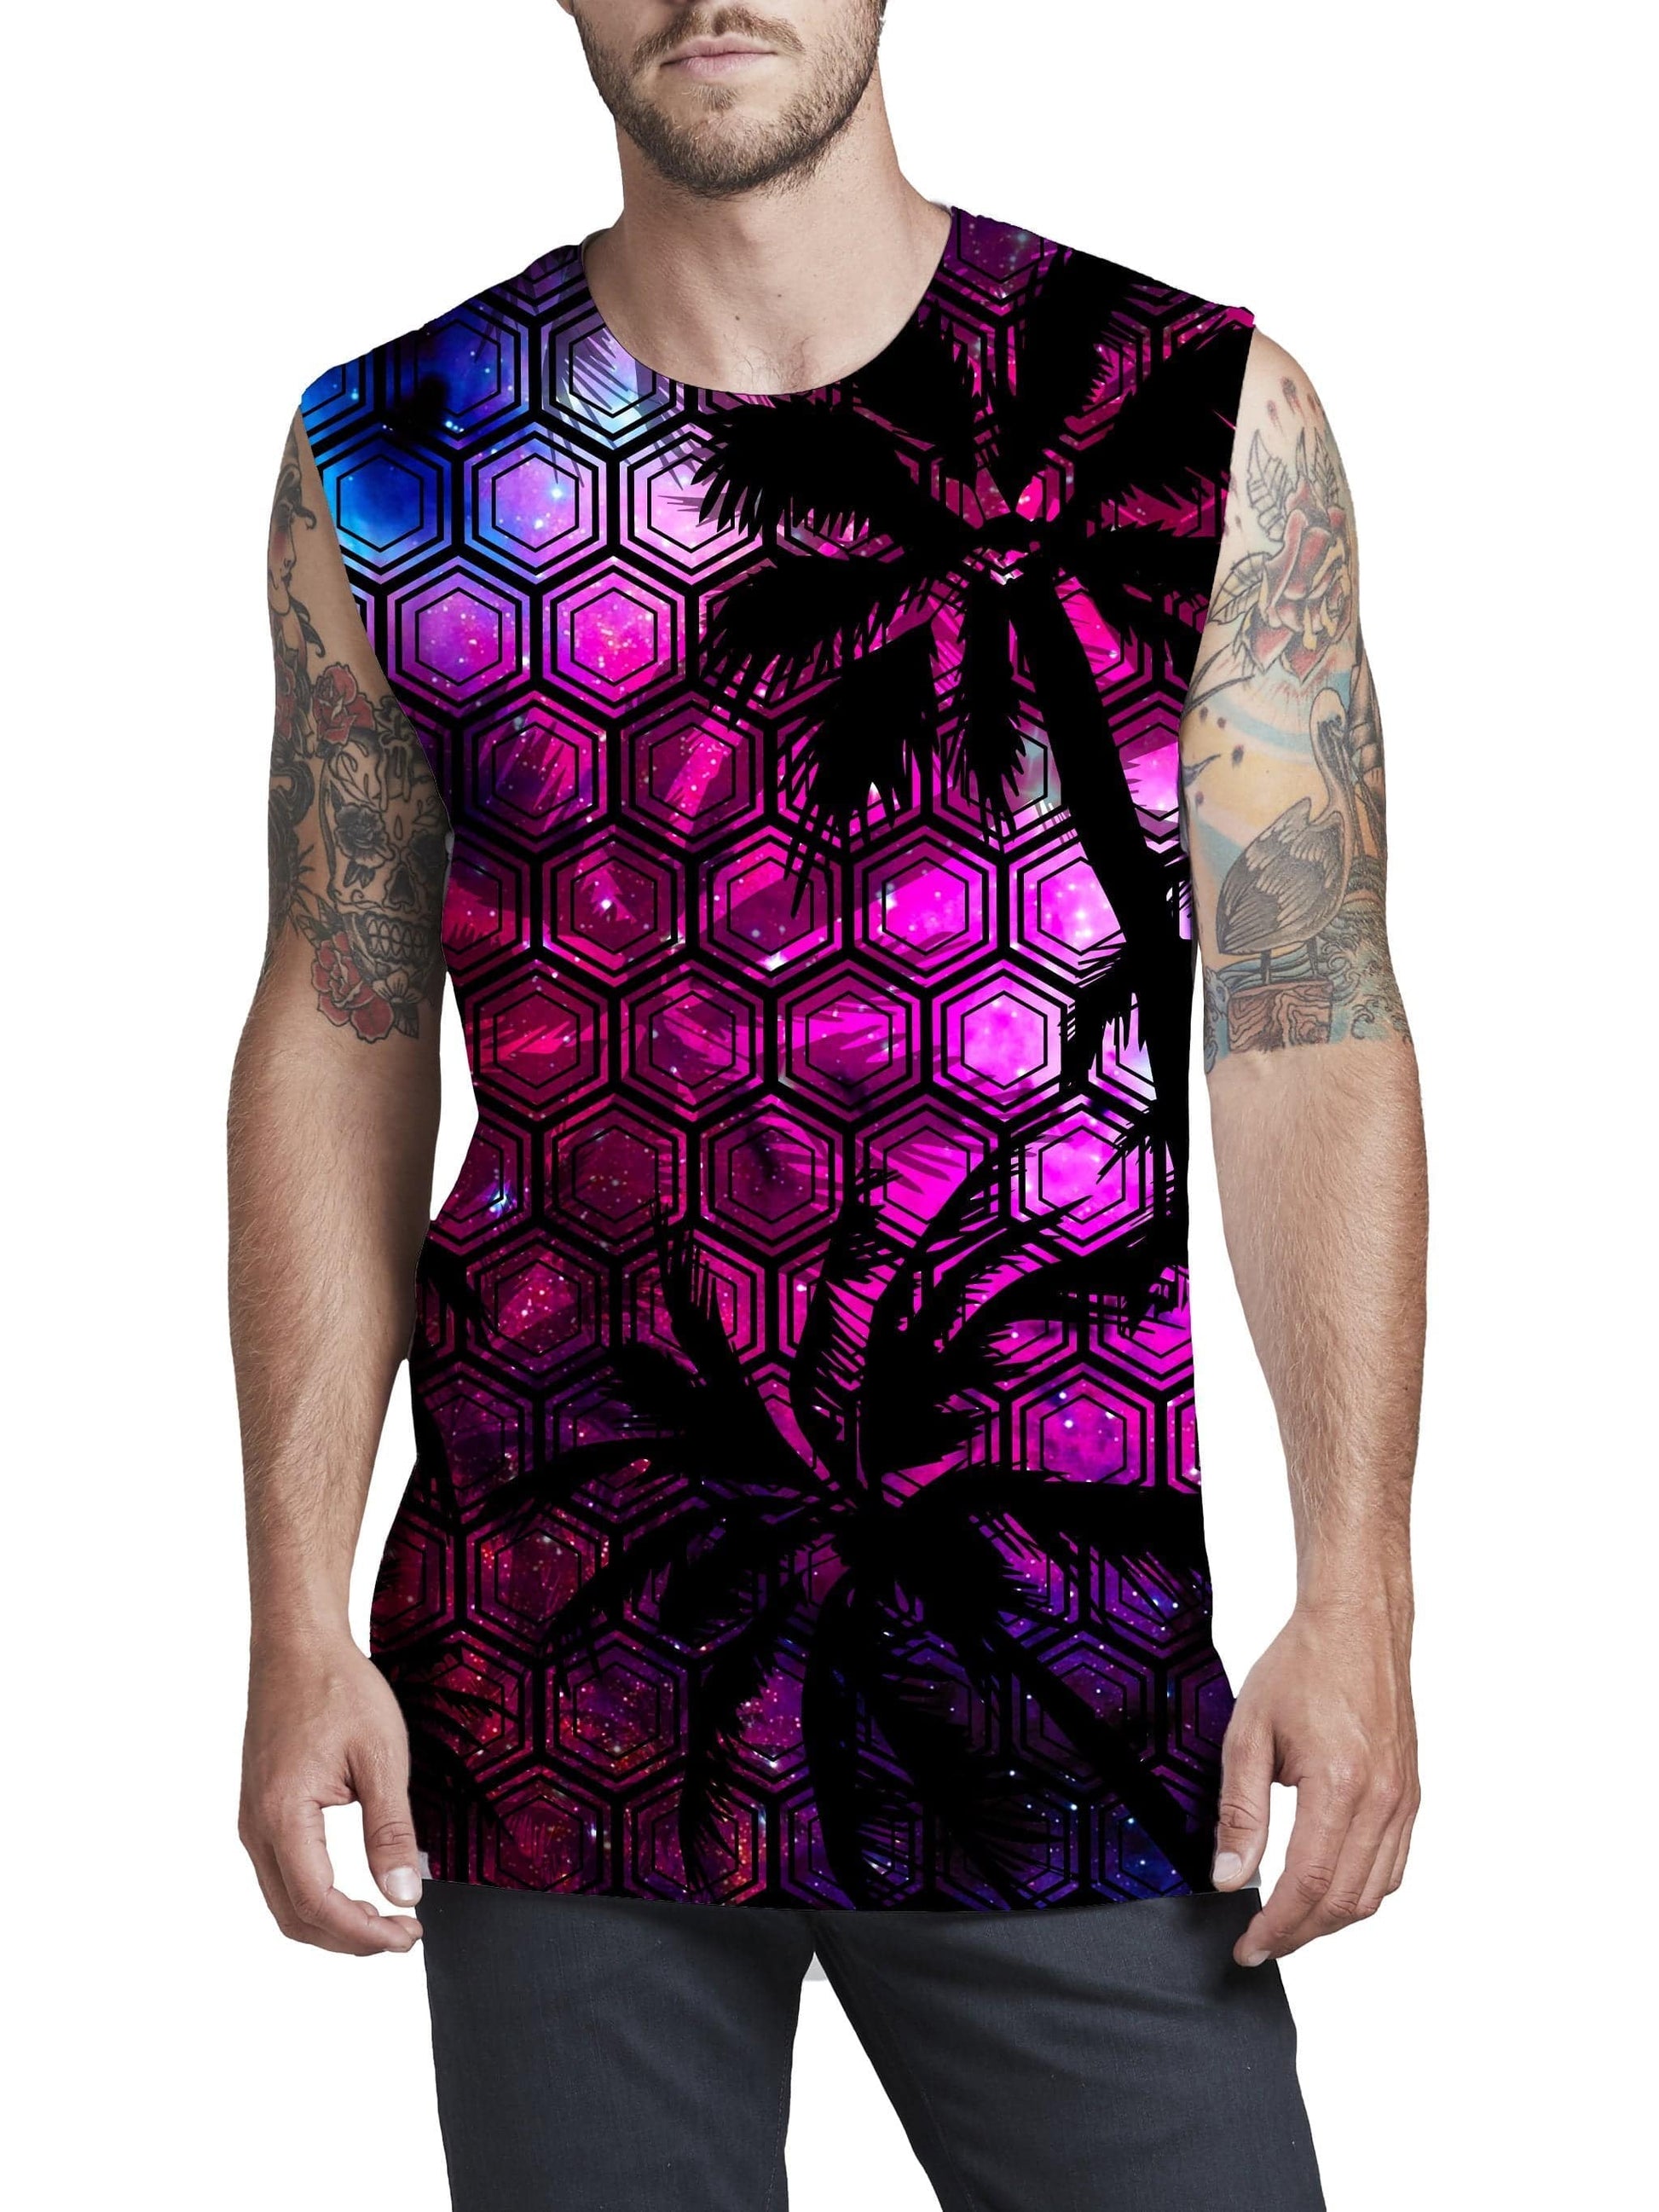 Galaxy In My Palm Men's Muscle Tank, Noctum X Truth, | iEDM